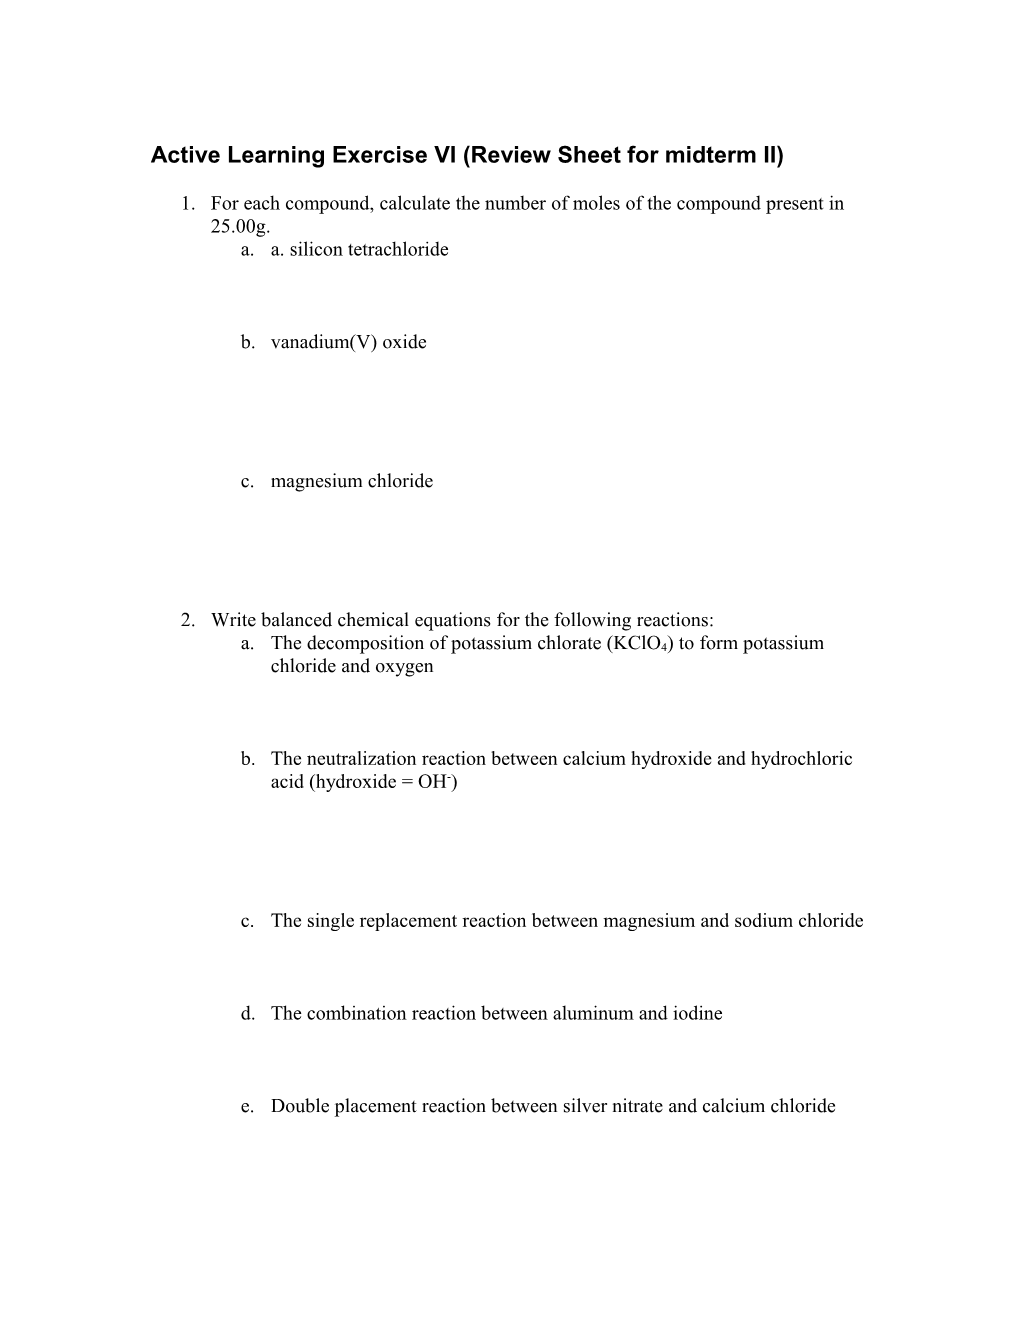 Active Learning Exercise VI (Review Sheet for Midterm II)